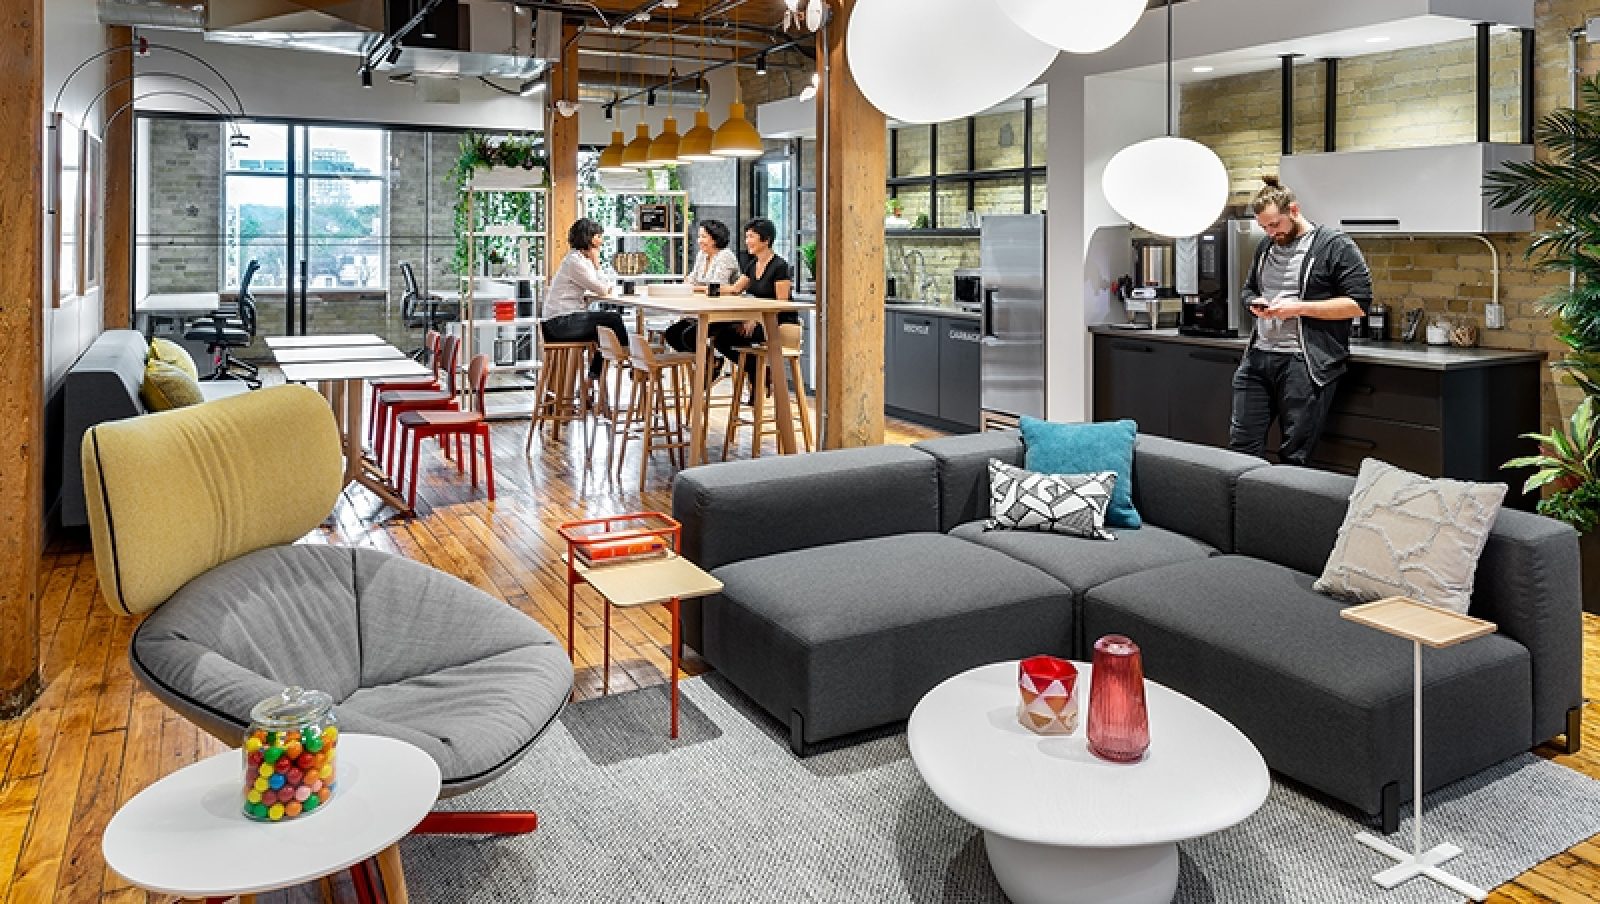 Coworking 2.0: Top 5 Advantages of the New Shared Workspace